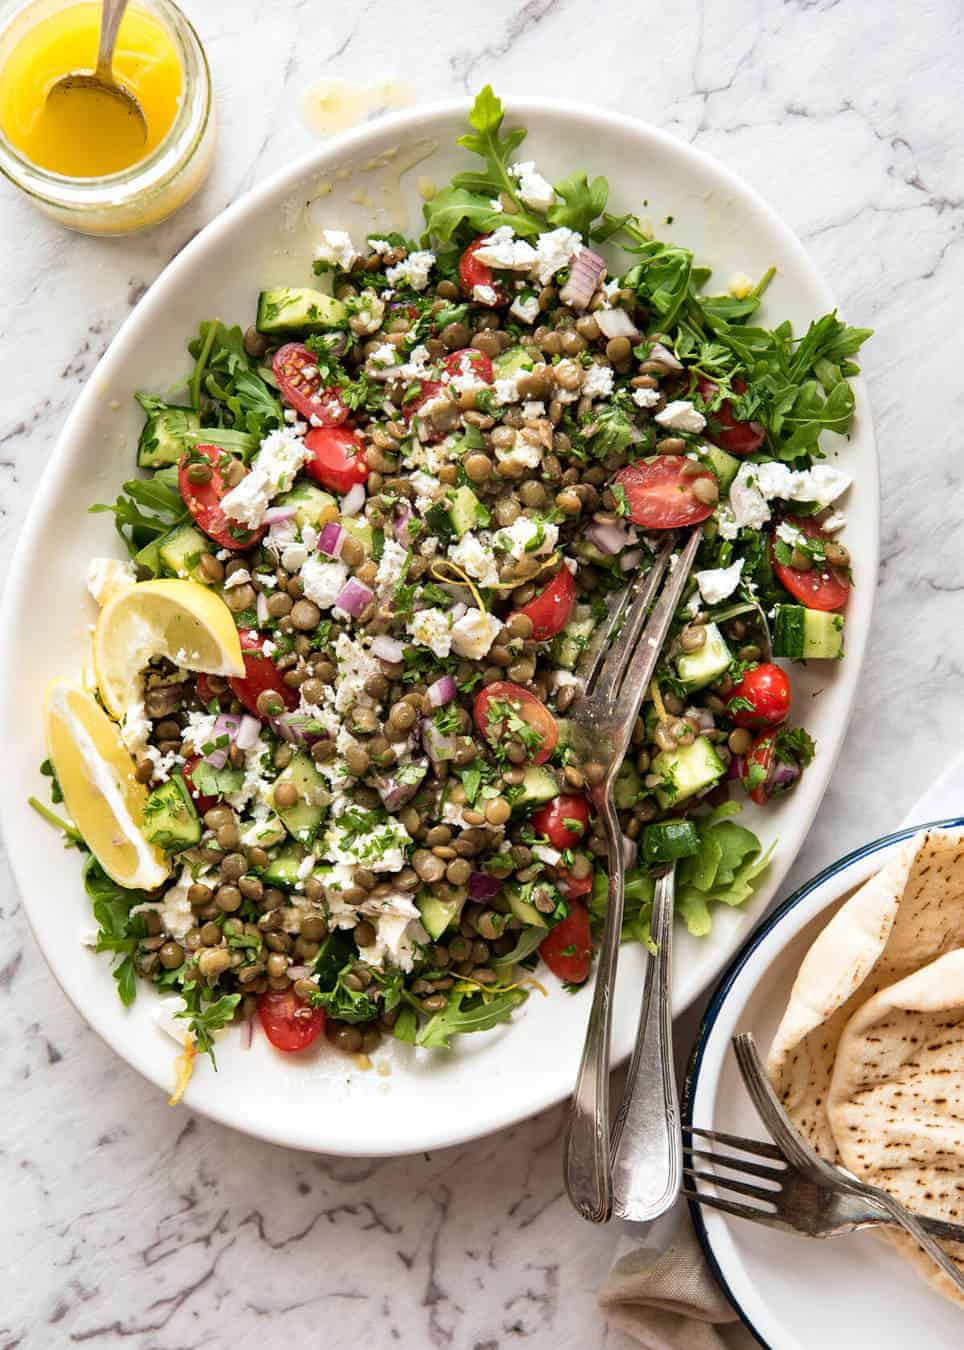 Sexy Lentil Salad from https://www.recipetineats.com/